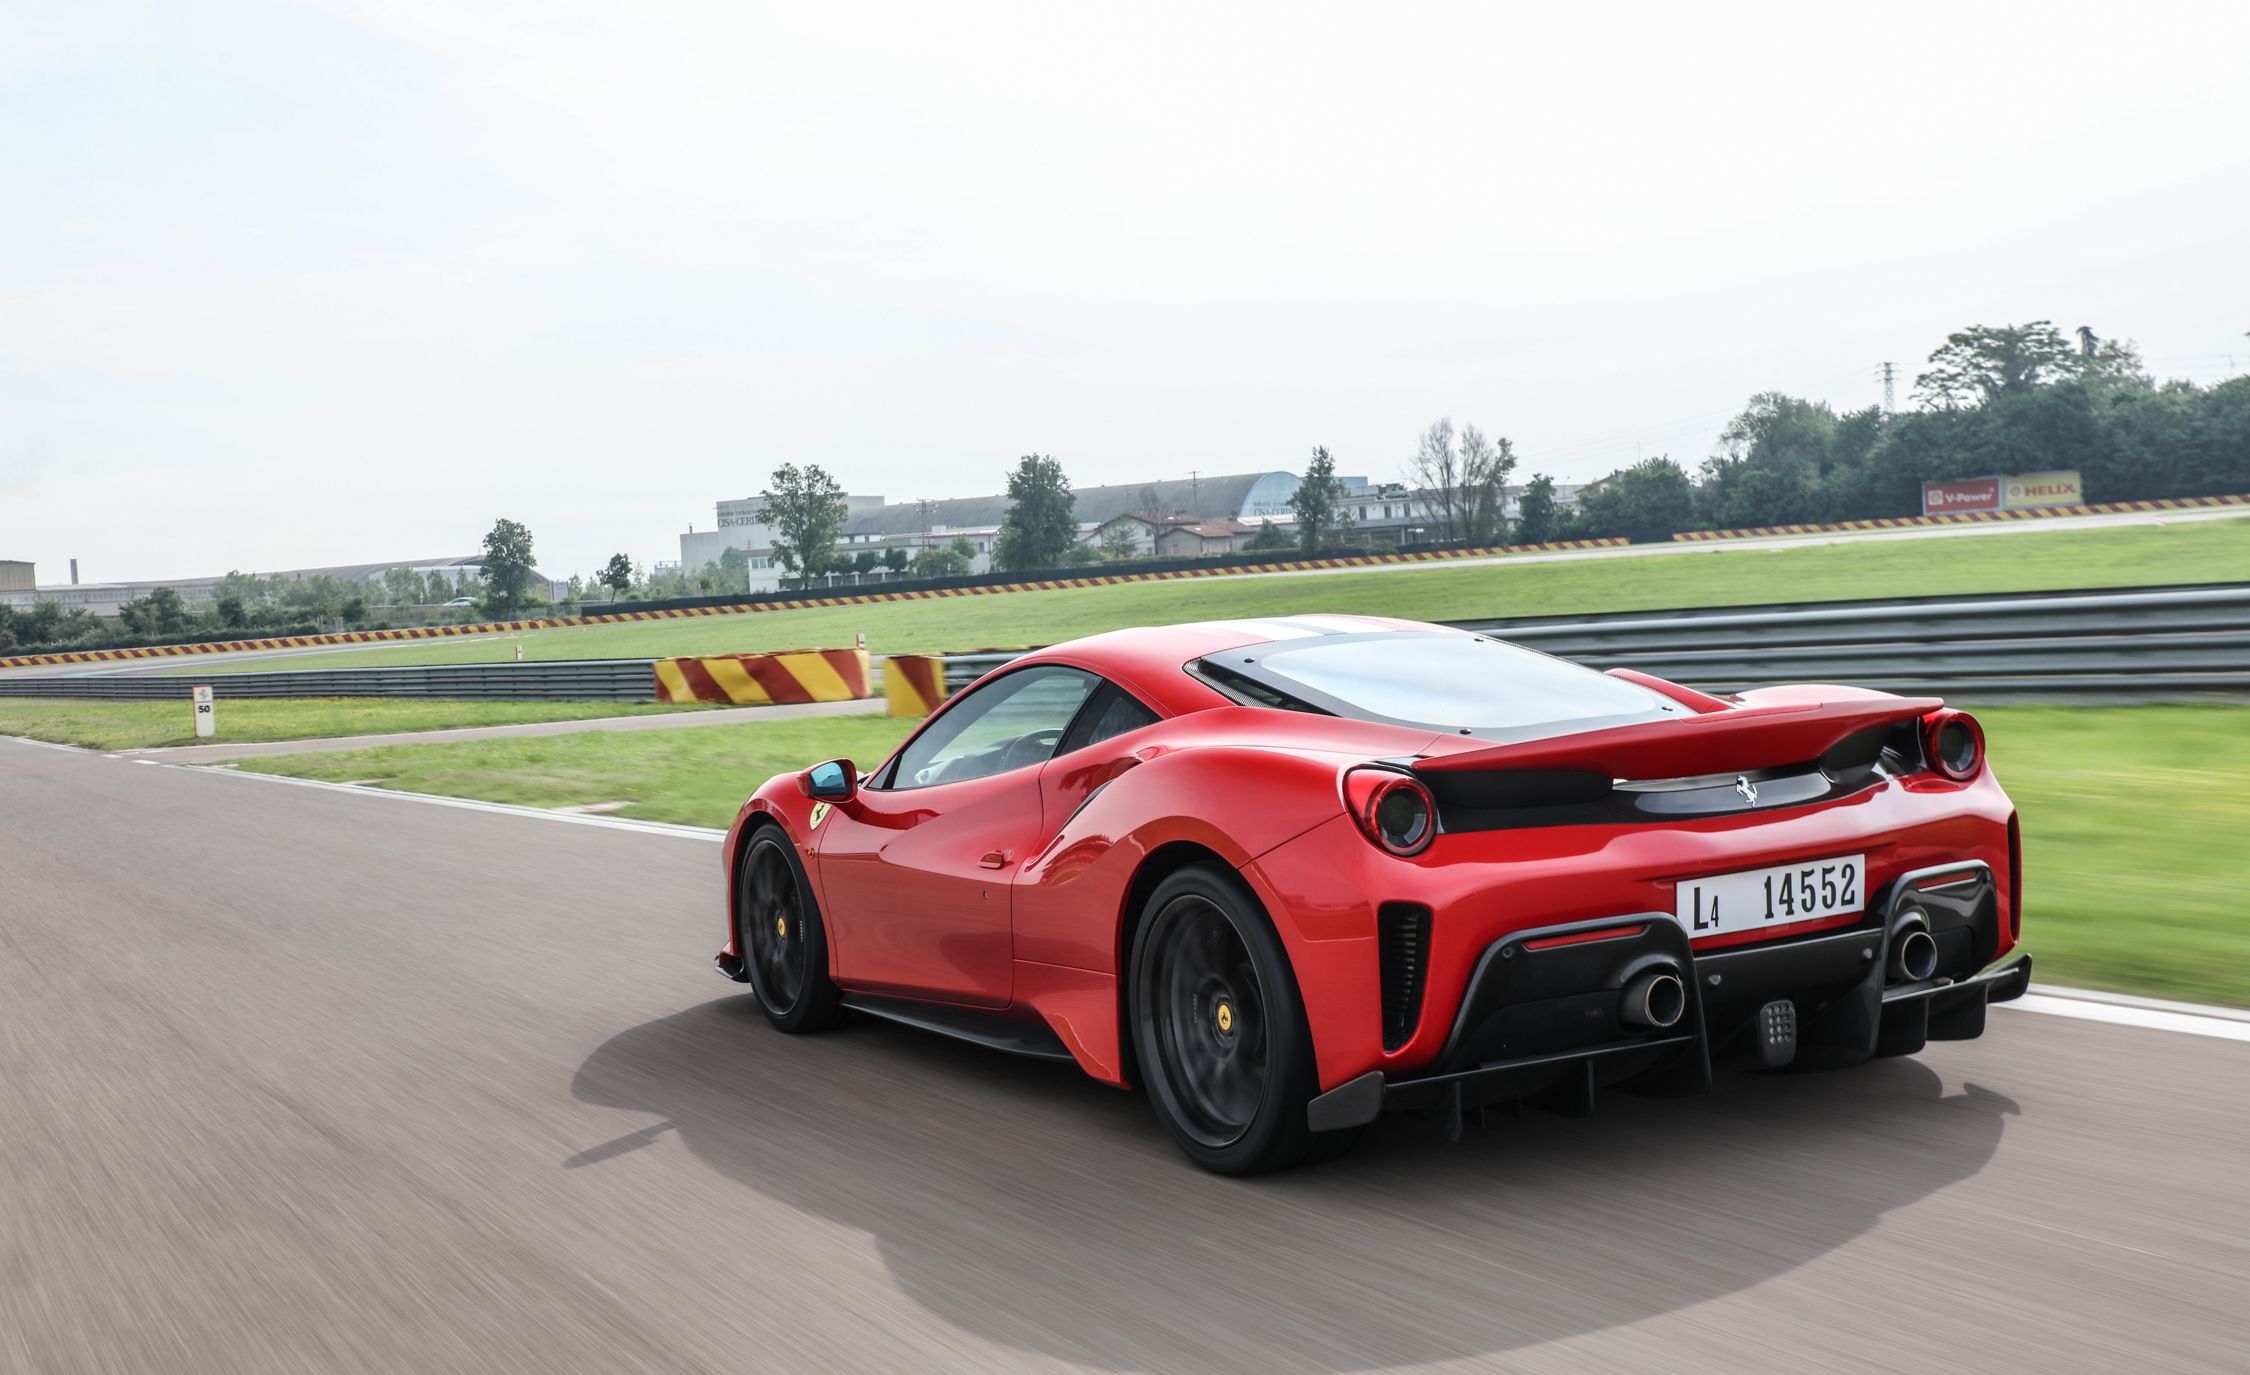 2020 Ferrari 488 Prices, Reviews, and Photos - MotorTrend